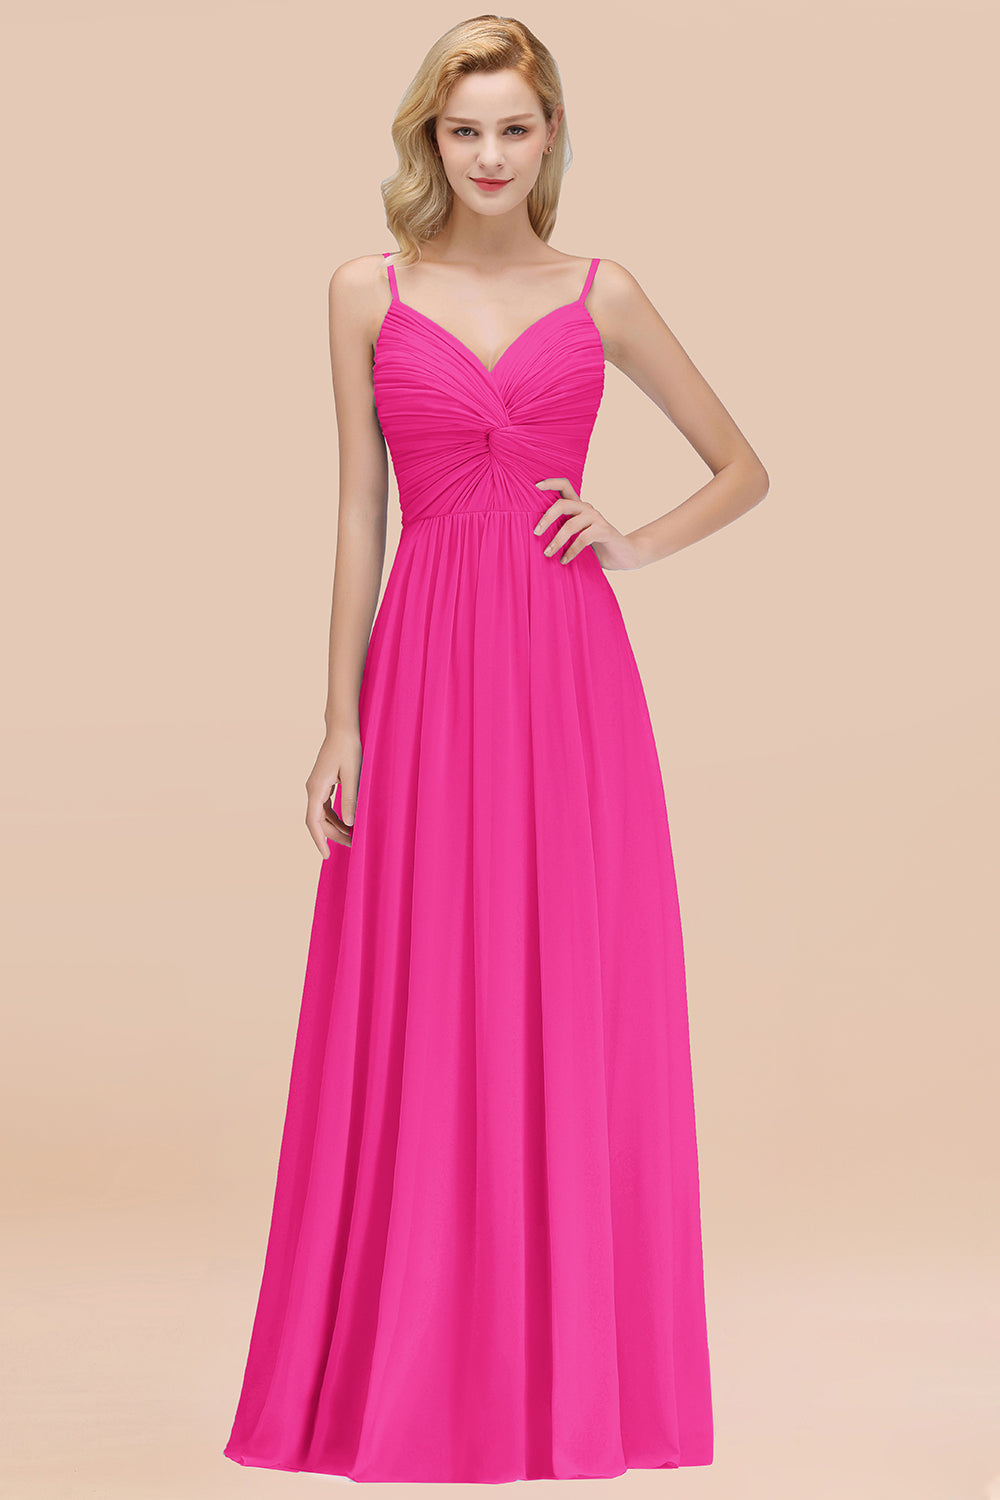 Chic V-Neck Pleated Backless Bridesmaid Dresses with Spaghetti Straps-27dress